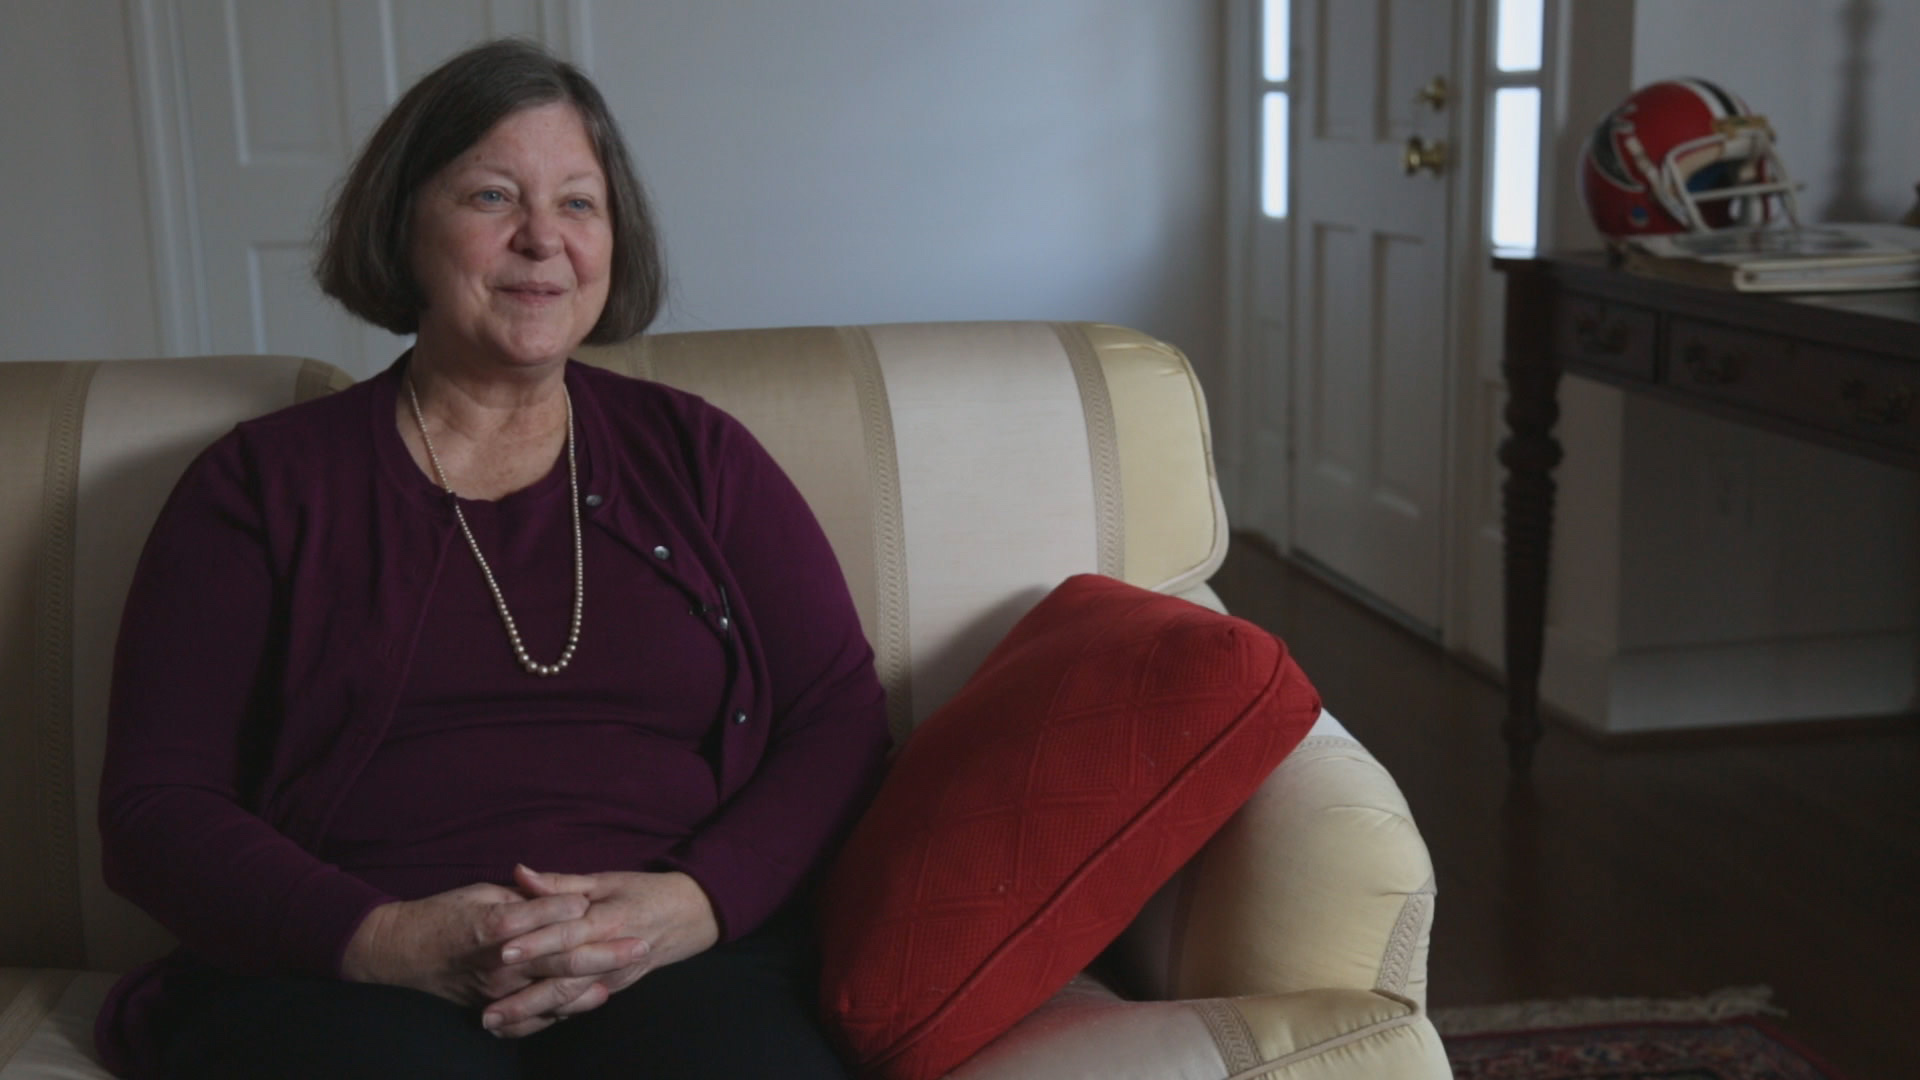  Mary Ann Easterling, the widow of former NFL player, Ray Easterling (December 2012) 